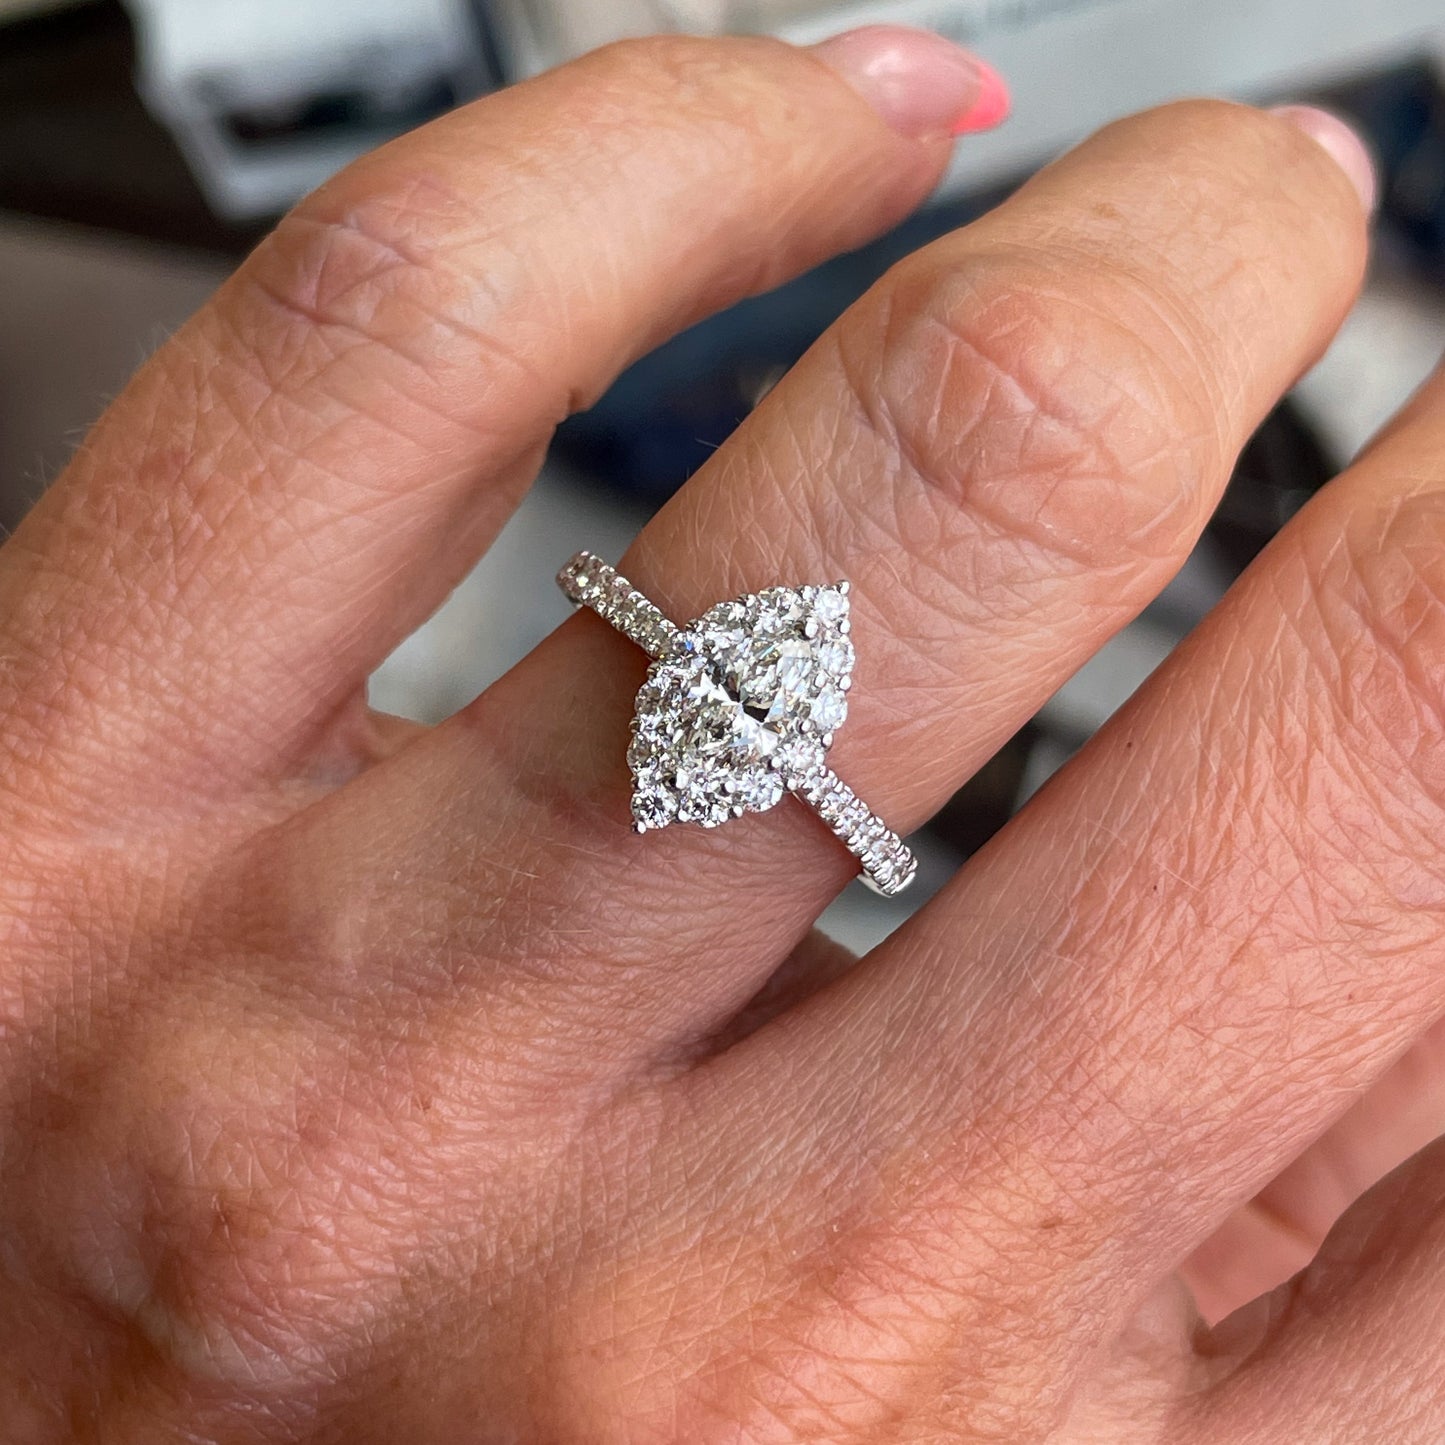 The Details...  One 18ct white gold diamond engagement ring. Marquis Cut Diamond with Diamond set halo and shoulders.   Centre Diamond: 0.51ct G SI2 Marquis Cut GIA Certificate  Melée: 0.68ct  18ct white gold